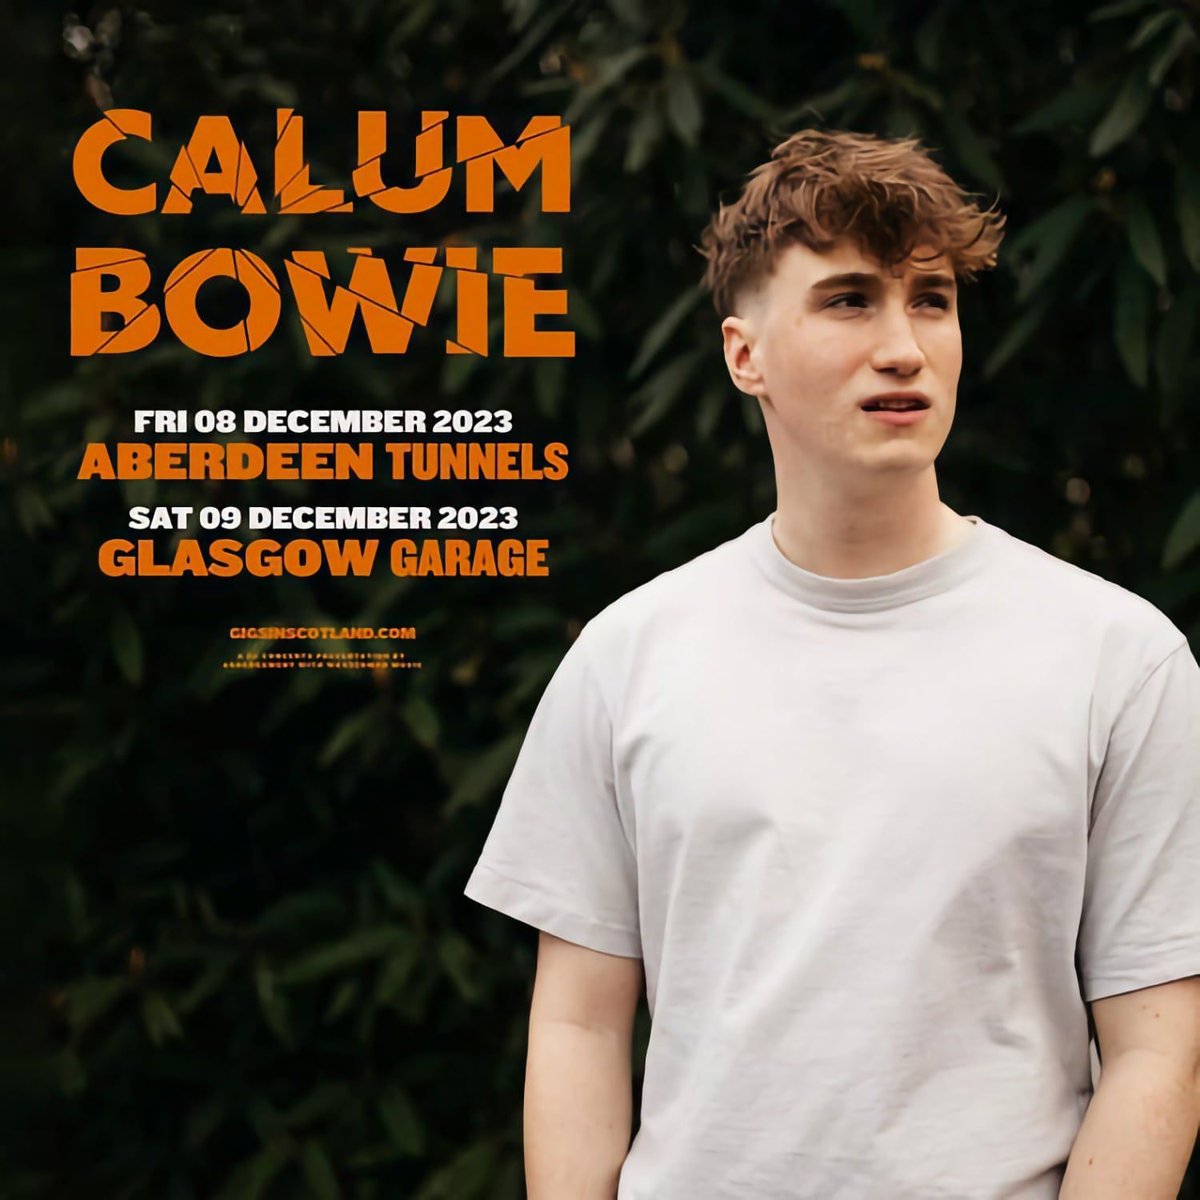 Catch Calum Bowie at The Tunnels next Friday. This vibrant new star in the Scottish music scene is known for his soulful melodies and honest lyrics. Emerging from Banchory, Calum has been captivating audiences and TikTok fans since 2018. Ticket link in bio